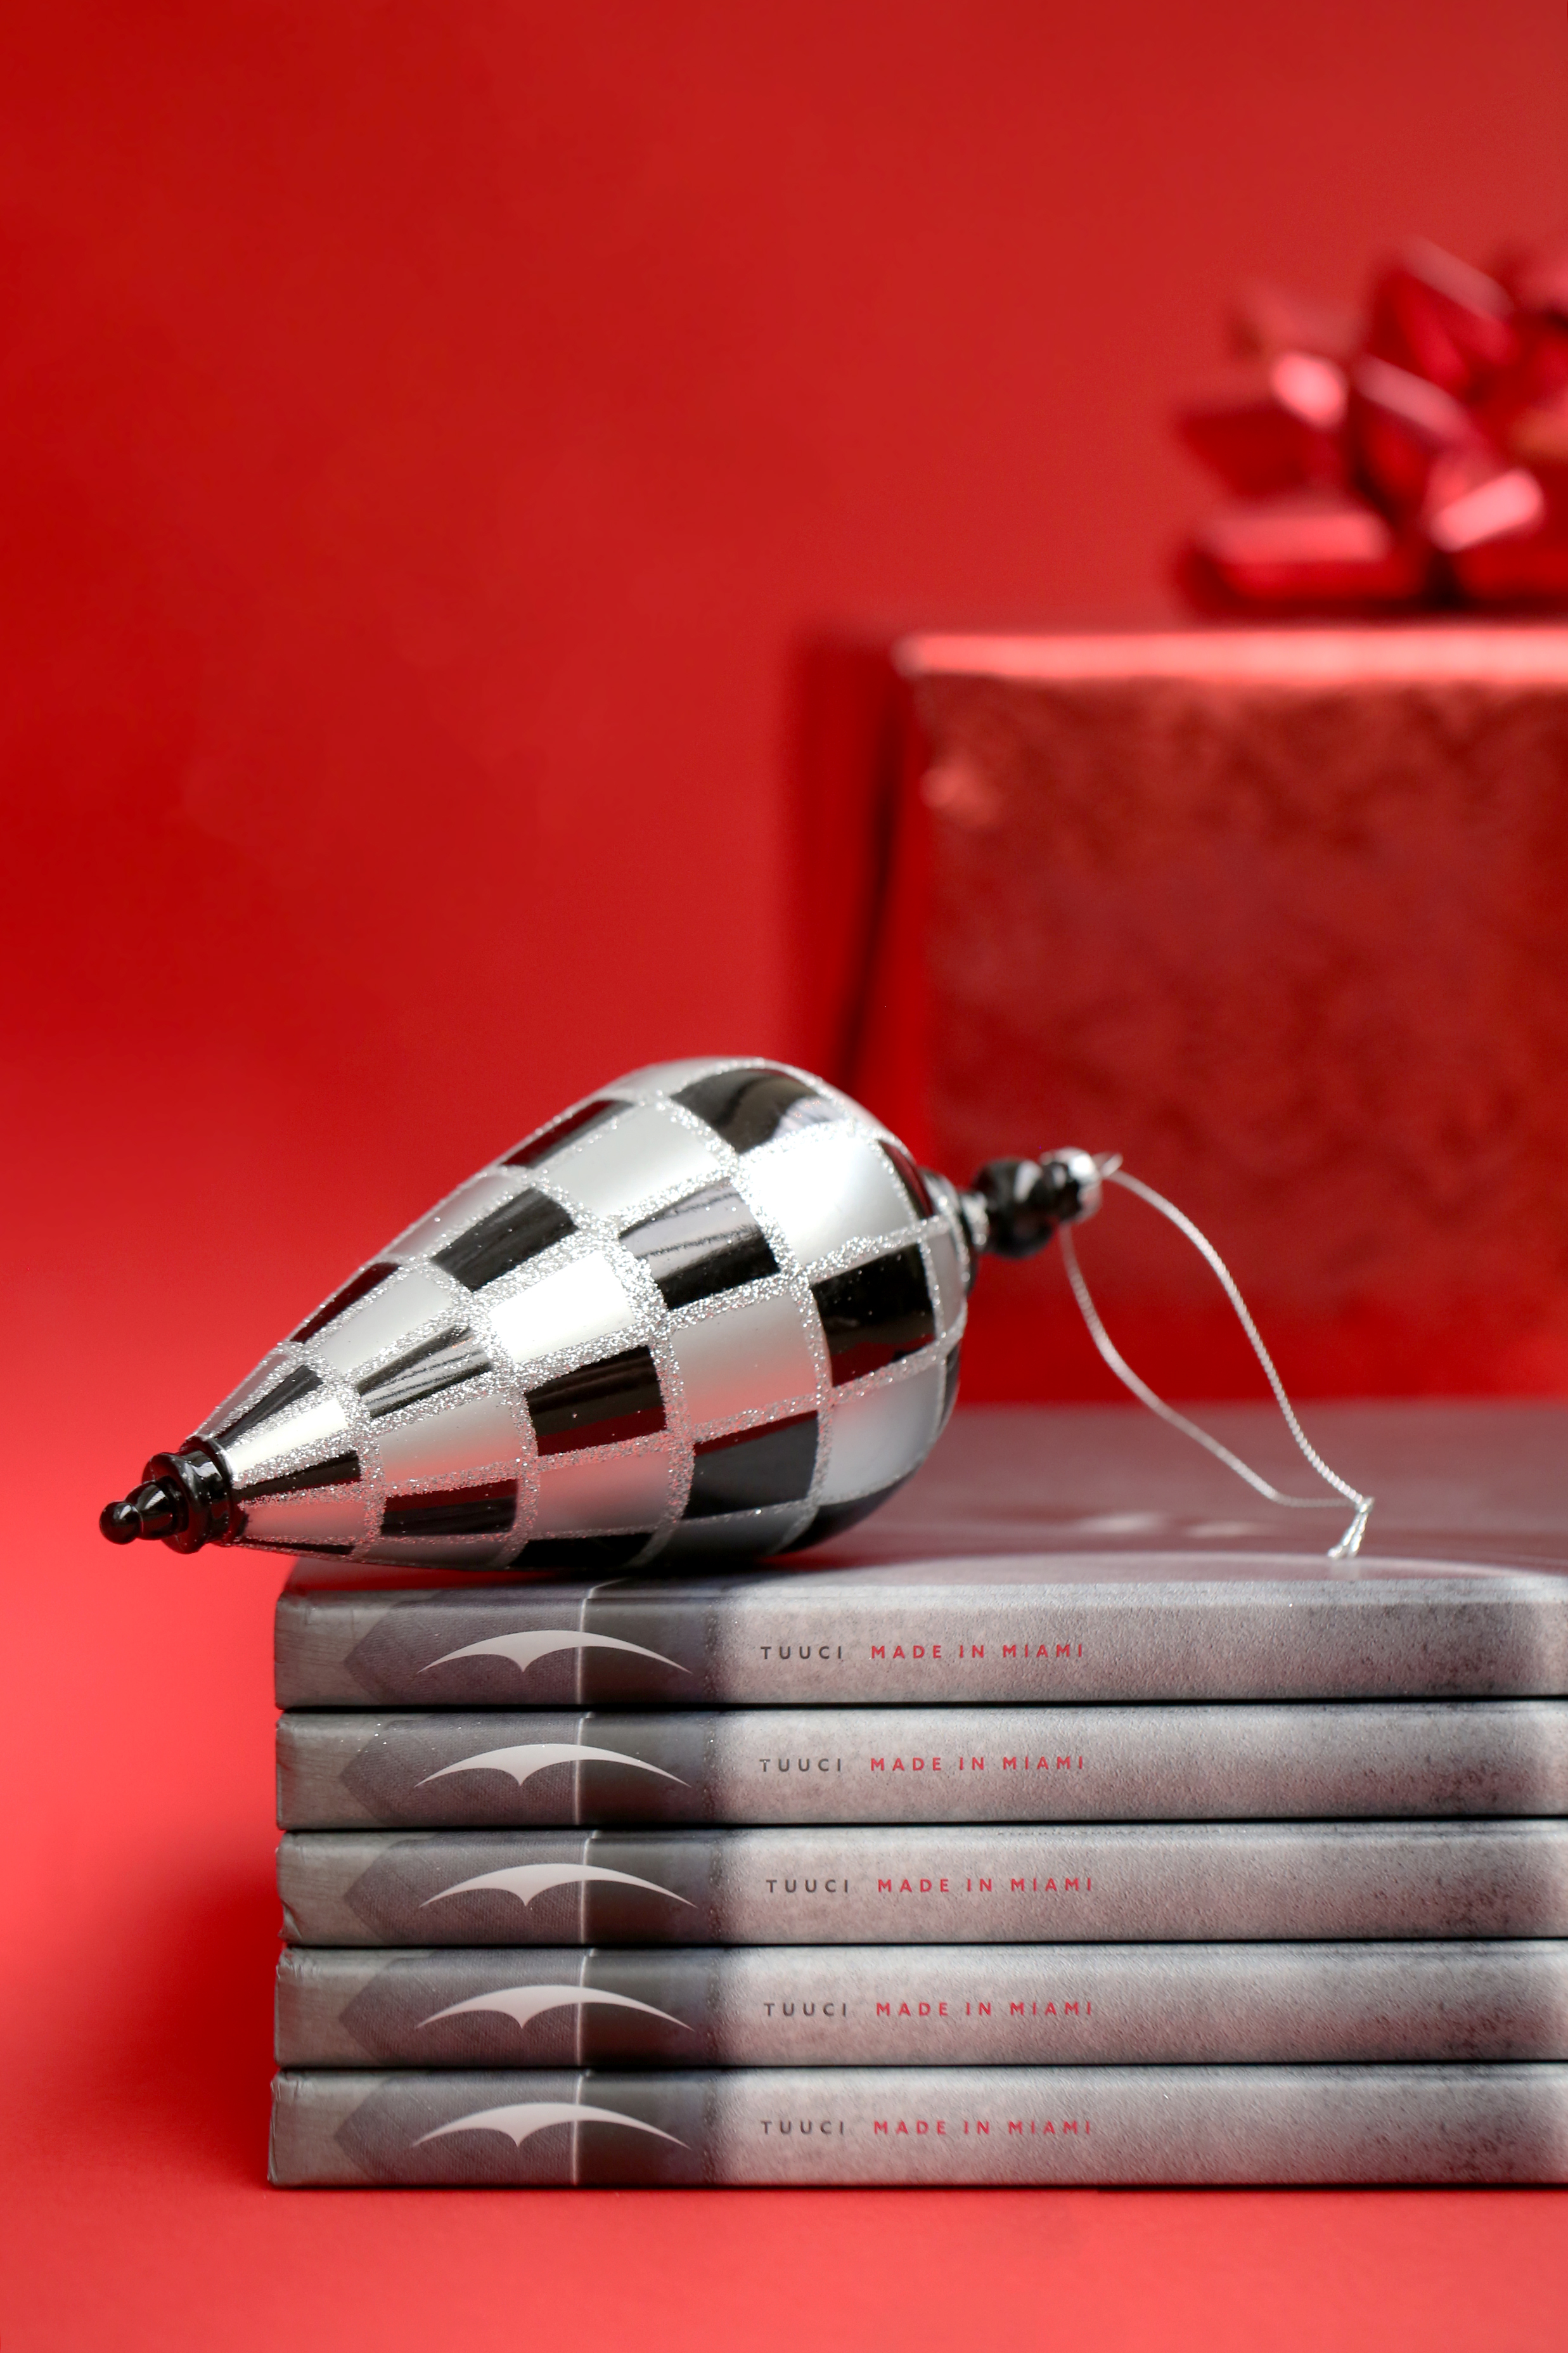 Spines of several Taste of Tucci books with a holiday ornament on top